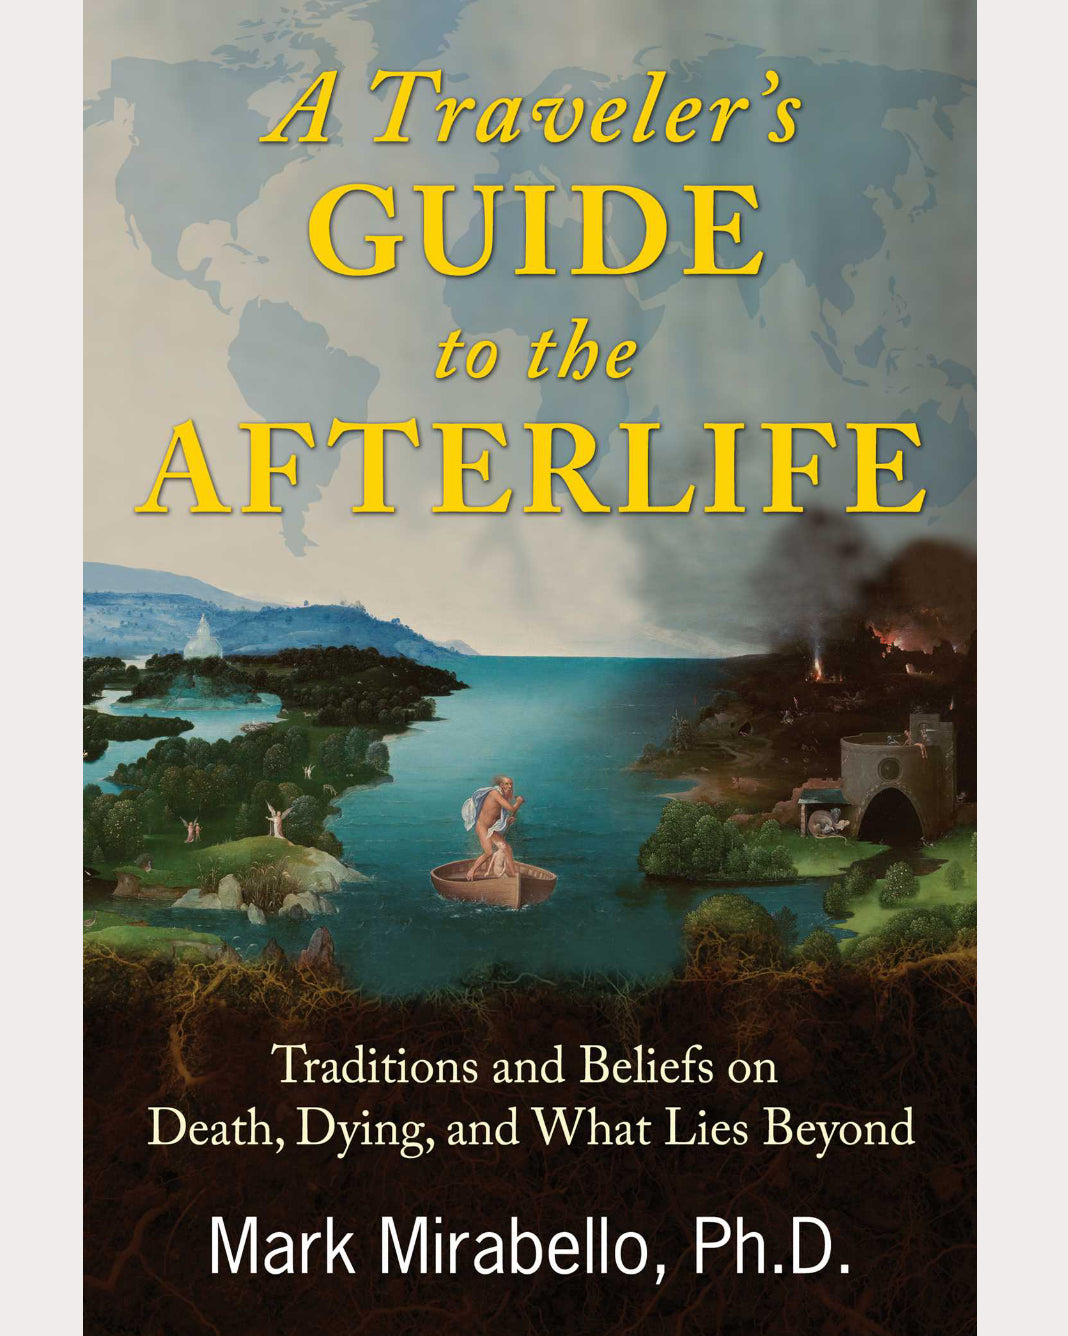 A Traveller's Guide to the Afterlife